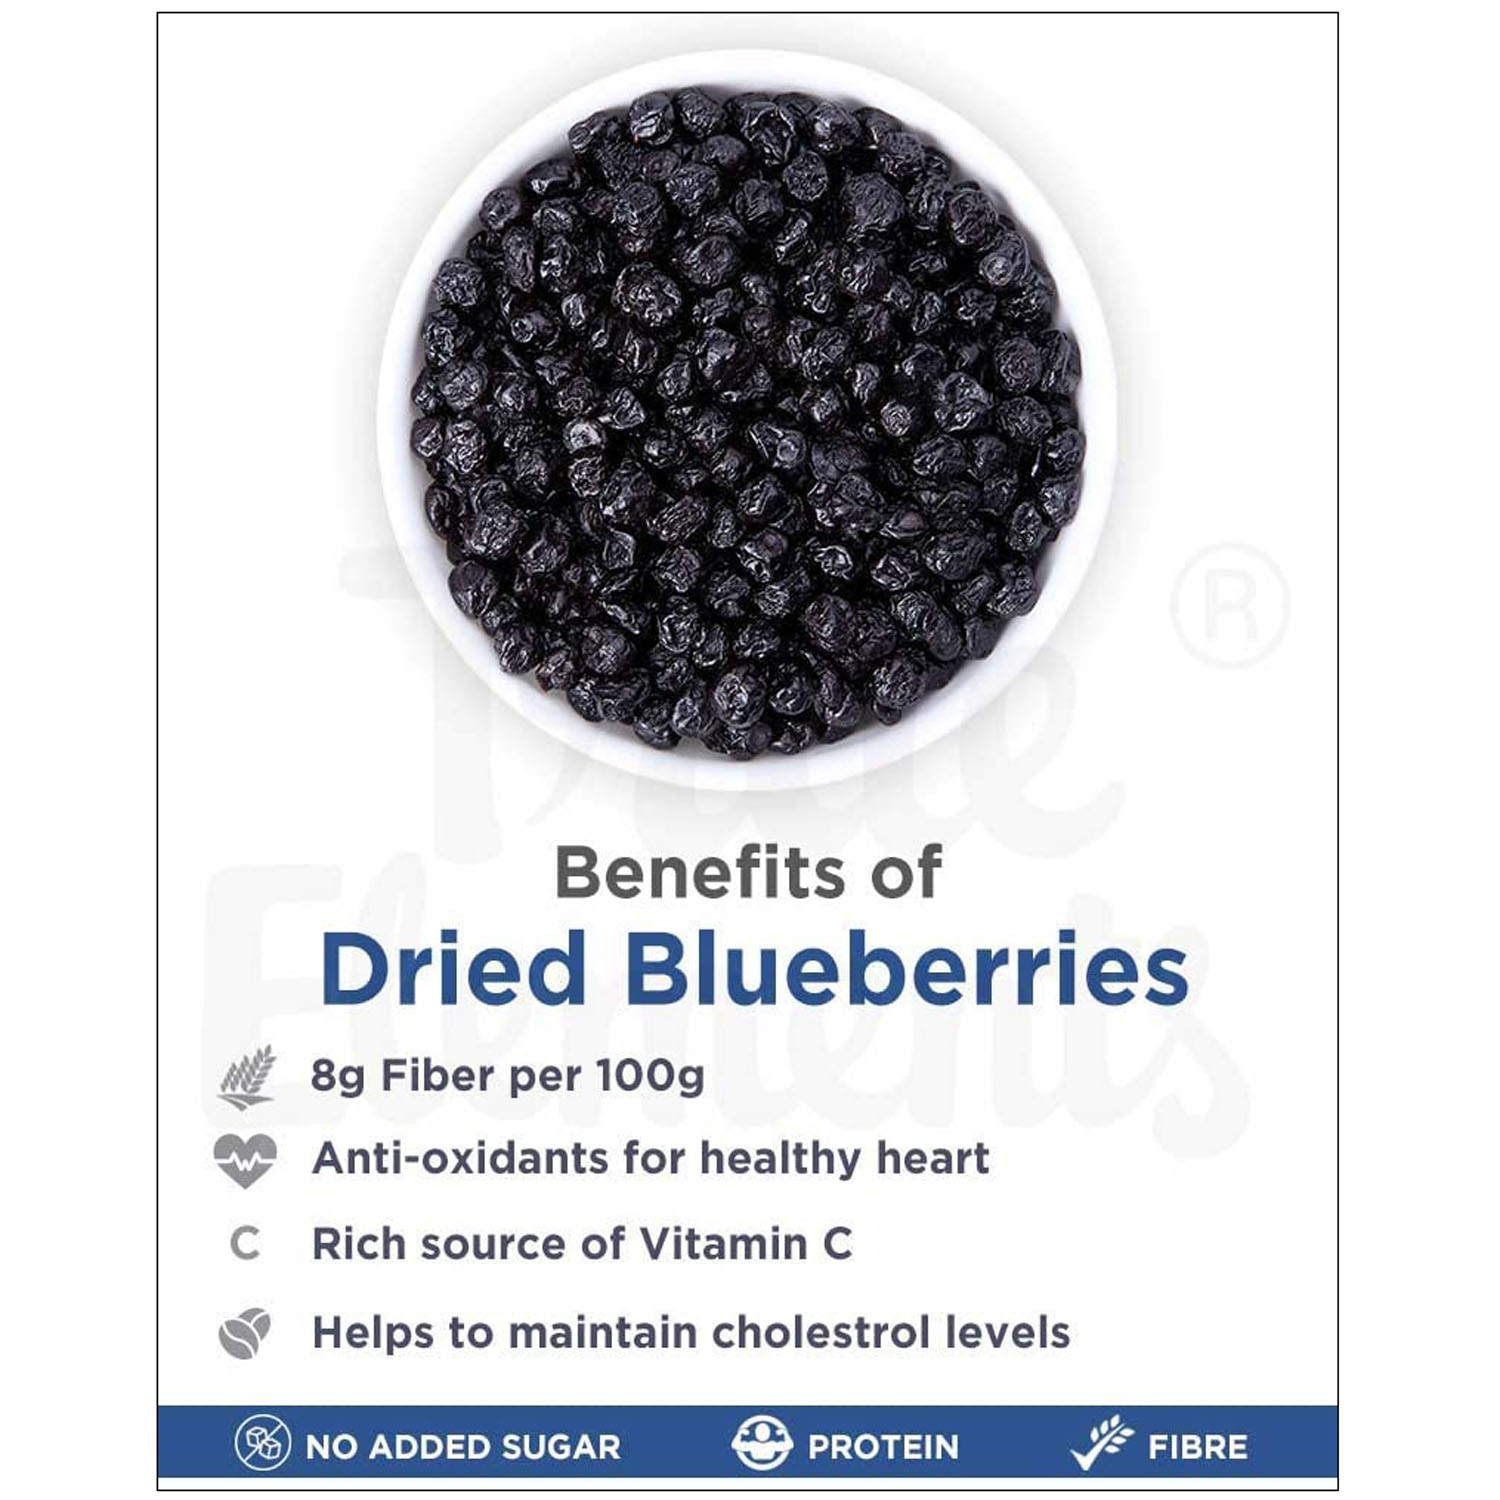 True Elements Dried Blueberries, 125 gm, Pack of 1 